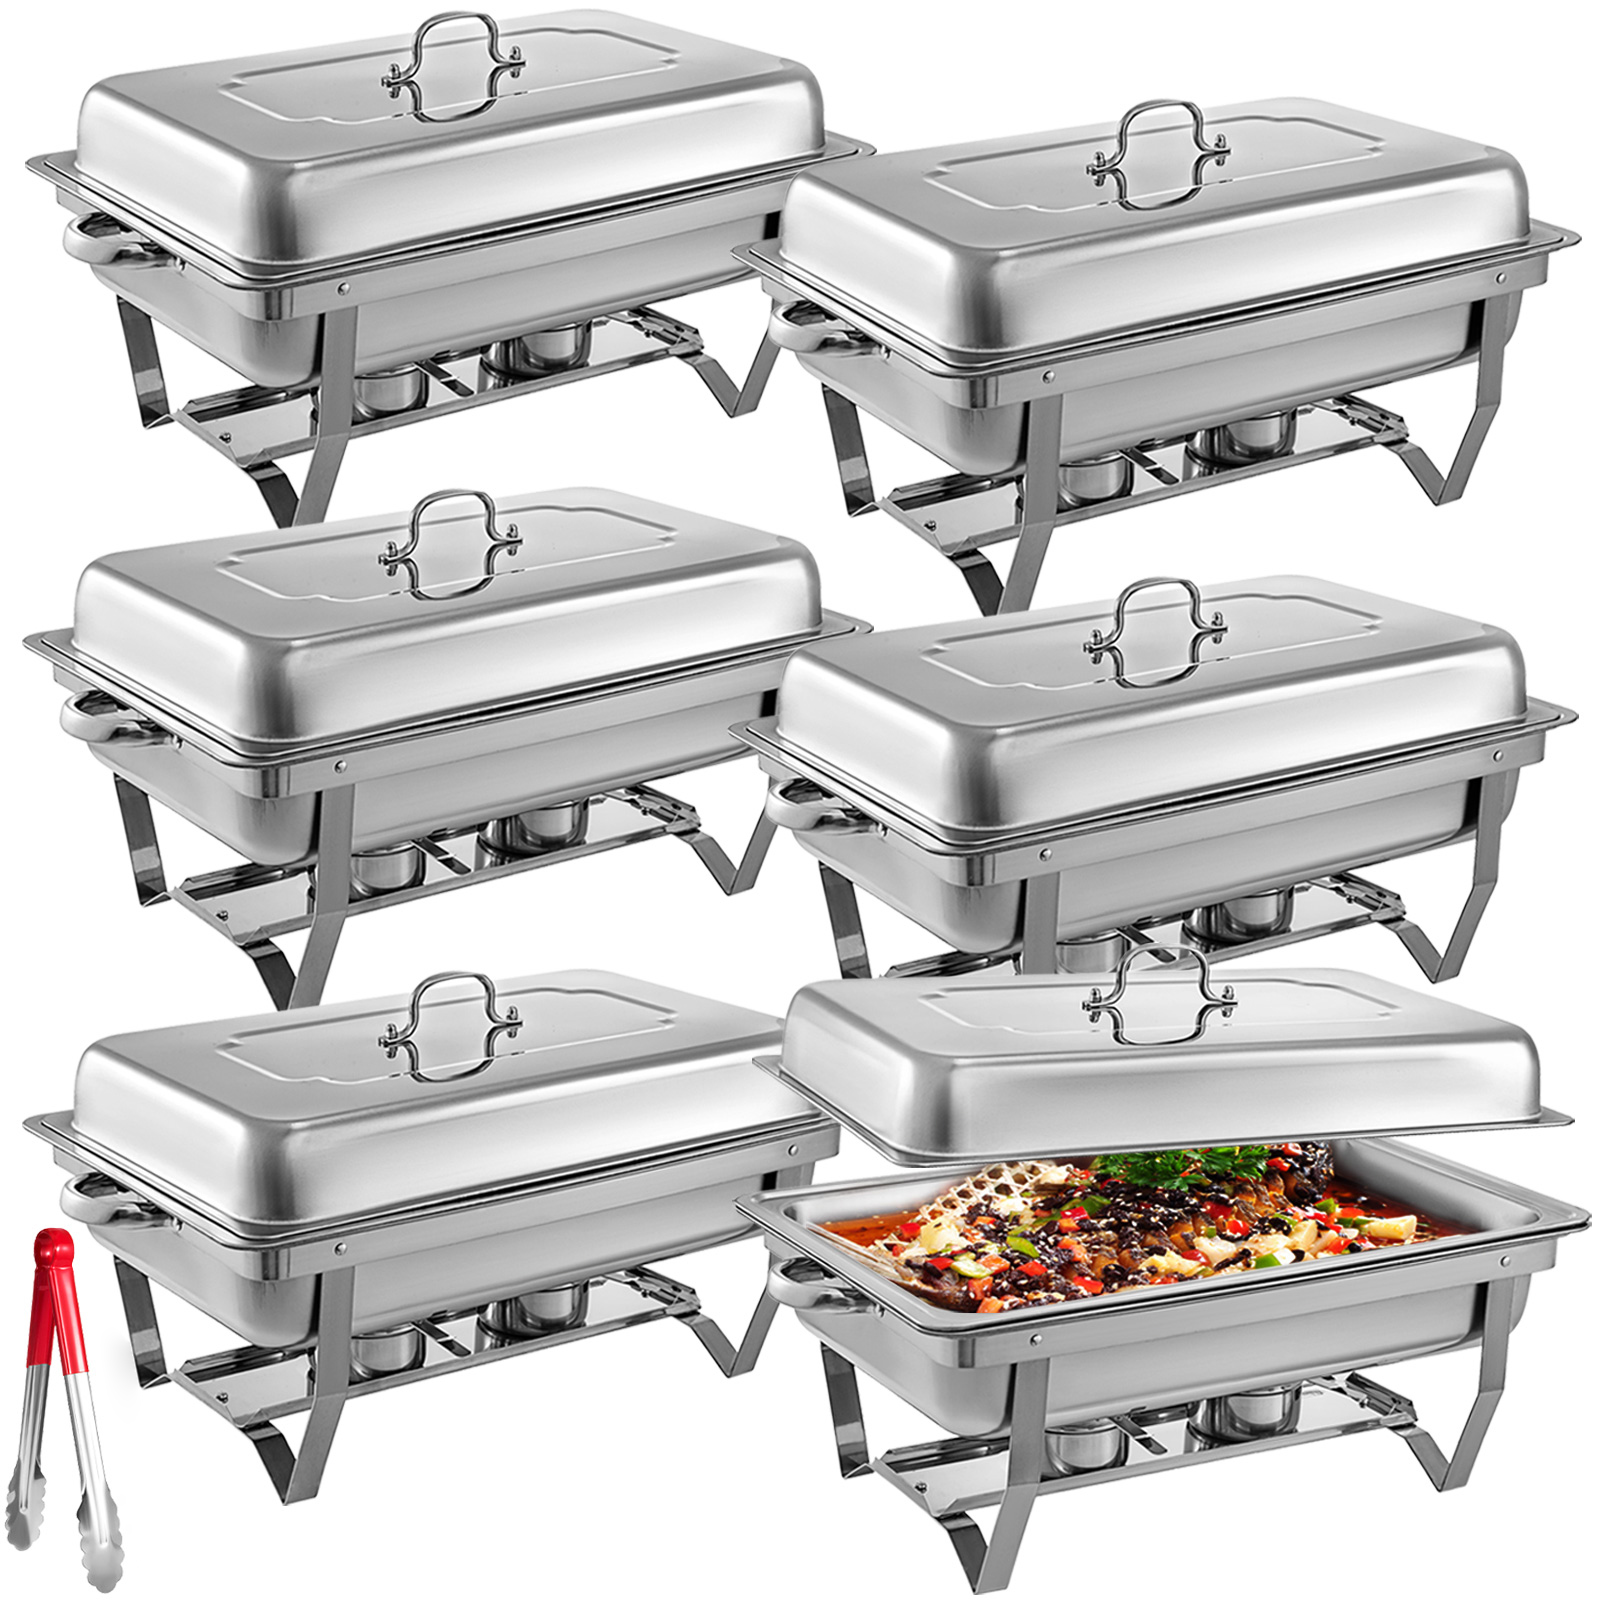 4 PACK CATERING STAINLESS STEEL CHAFER CHAFING DISH SETS 8 QT PARTY PACK 